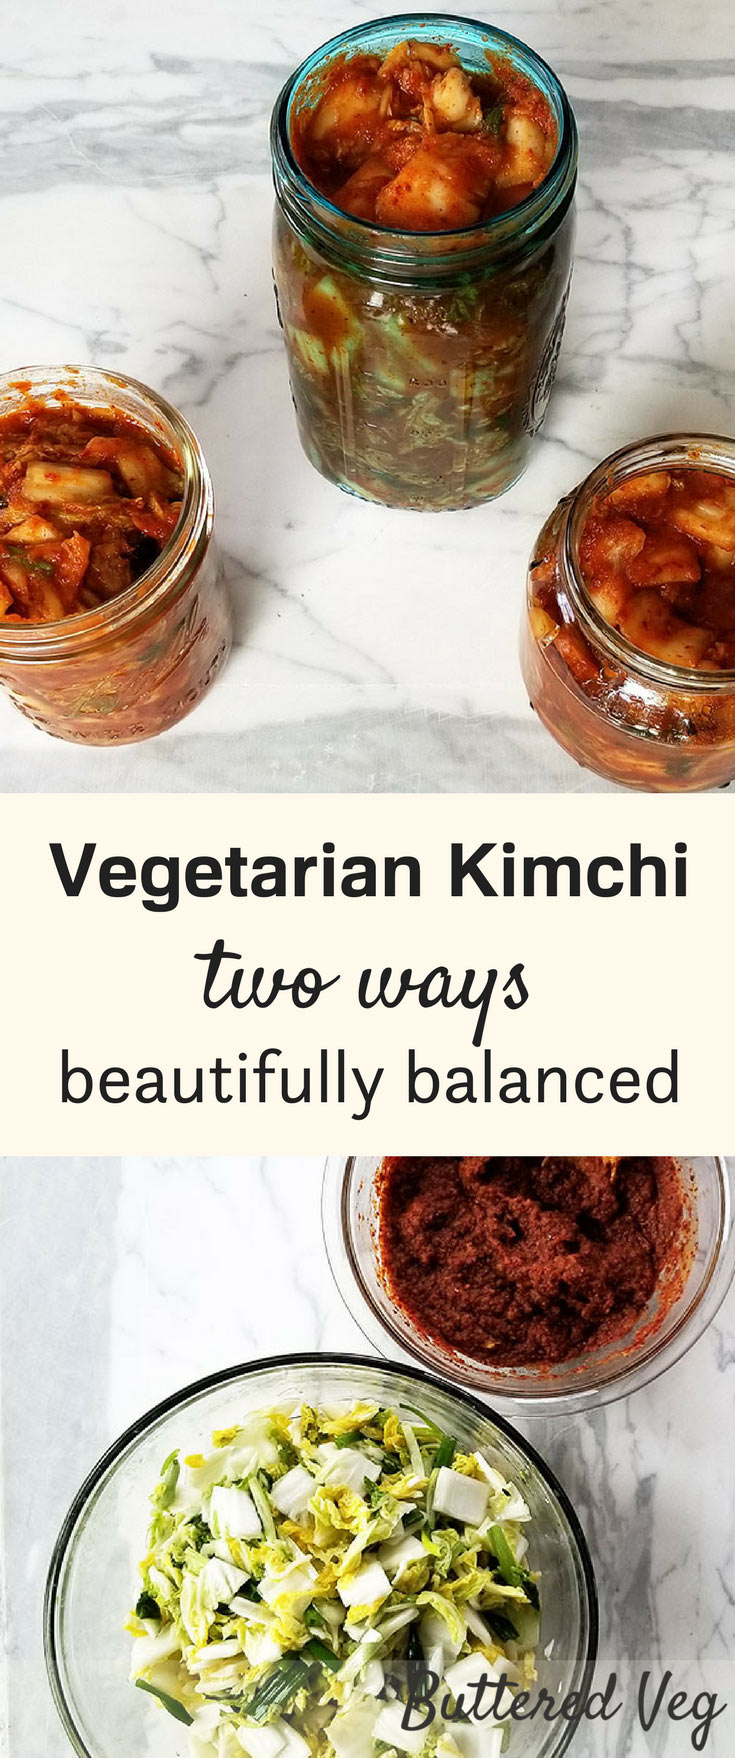 Two Fermented Vegetarian Kimchi Recipes